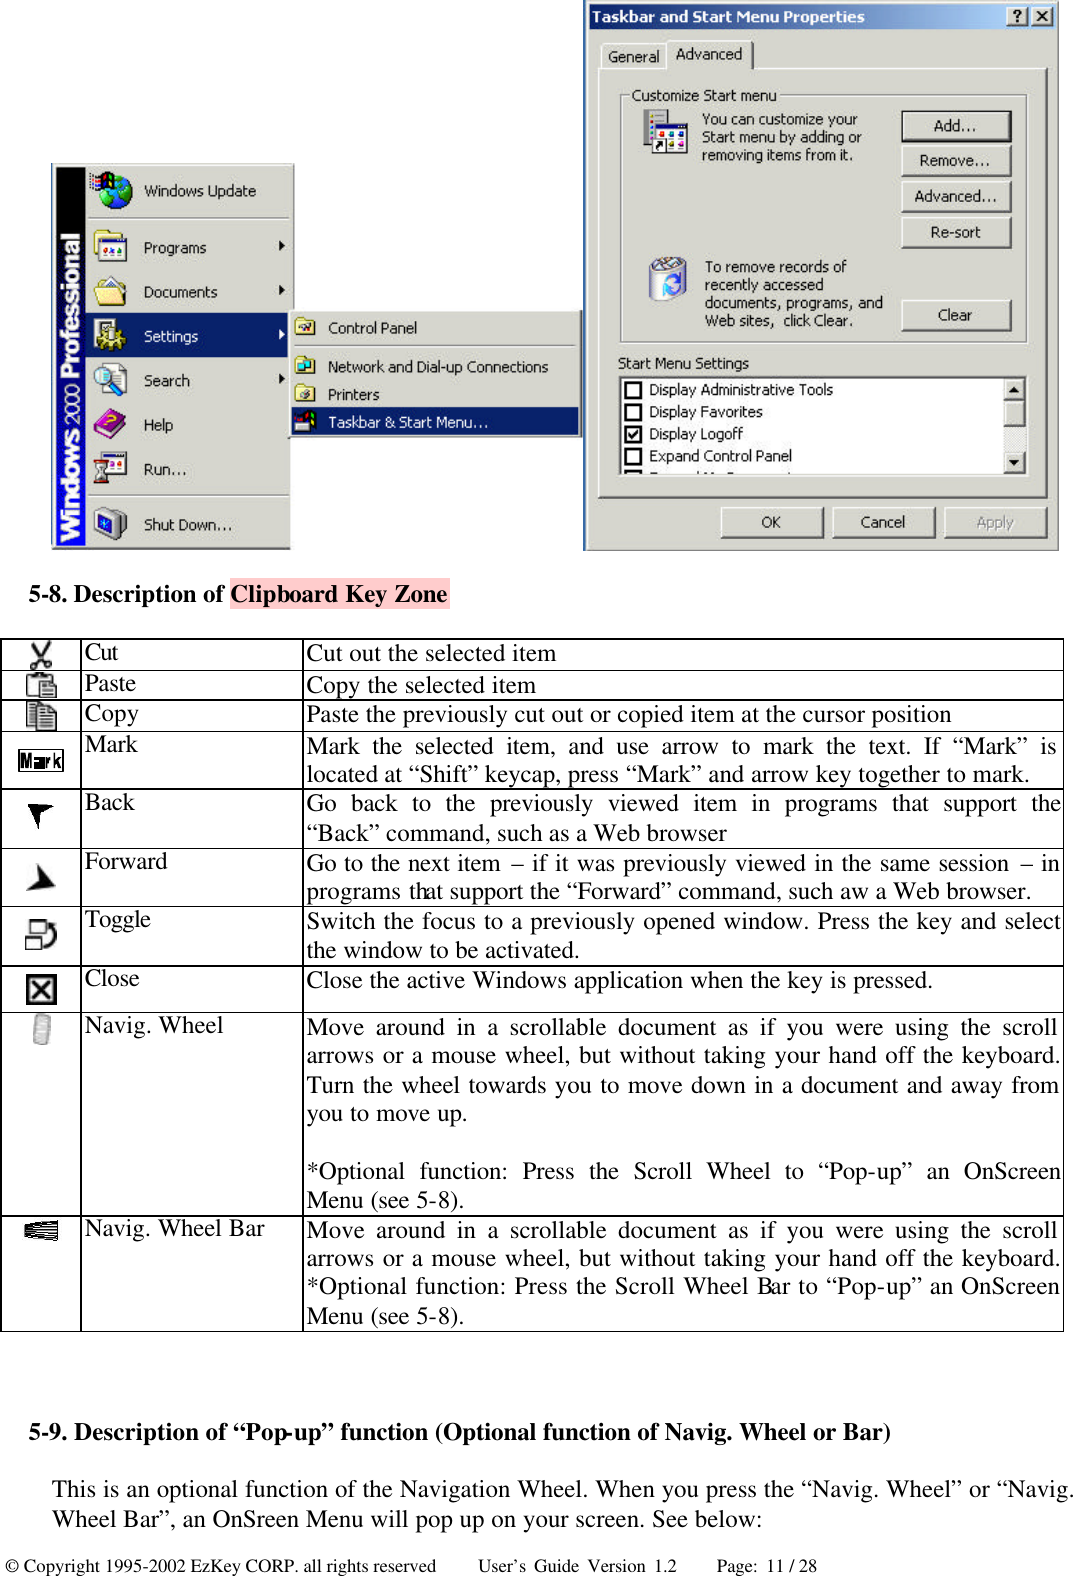 © Copyright 1995-2002 EzKey CORP. all rights reserved     User’s Guide Version 1.2     Page: 11 / 28  5-8. Description of Clipboard Key Zone  Cut Cut out the selected item  Paste Copy the selected item  Copy Paste the previously cut out or copied item at the cursor position  Mark Mark the selected item, and use arrow to mark the text. If “Mark” is located at “Shift” keycap, press “Mark” and arrow key together to mark.  Back Go back to the previously viewed item in programs that support the “Back” command, such as a Web browser  Forward Go to the next item – if it was previously viewed in the same session – in programs that support the “Forward” command, such aw a Web browser.  Toggle Switch the focus to a previously opened window. Press the key and select the window to be activated.  Close Close the active Windows application when the key is pressed.  Navig. Wheel Move around in a scrollable document as if you were using the scroll arrows or a mouse wheel, but without taking your hand off the keyboard. Turn the wheel towards you to move down in a document and away from you to move up. *Optional function: Press the Scroll Wheel to “Pop-up” an OnScreen Menu (see 5-8).  Navig. Wheel Bar Move around in a scrollable document as if you were using the scroll arrows or a mouse wheel, but without taking your hand off the keyboard. *Optional function: Press the Scroll Wheel Bar to “Pop-up” an OnScreen Menu (see 5-8).  5-9. Description of “Pop-up” function (Optional function of Navig. Wheel or Bar) This is an optional function of the Navigation Wheel. When you press the “Navig. Wheel” or “Navig. Wheel Bar”, an OnSreen Menu will pop up on your screen. See below: 